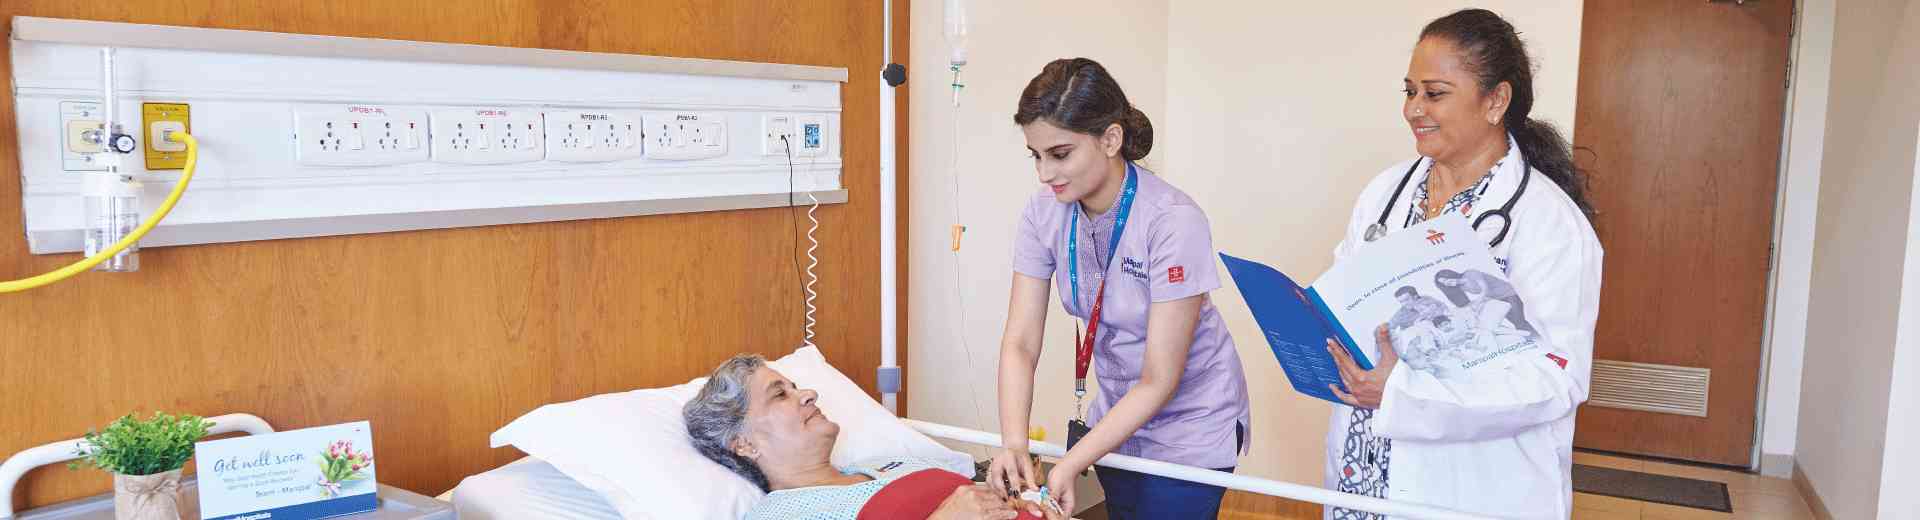 Outpatient and In-patient services in Varthur Road